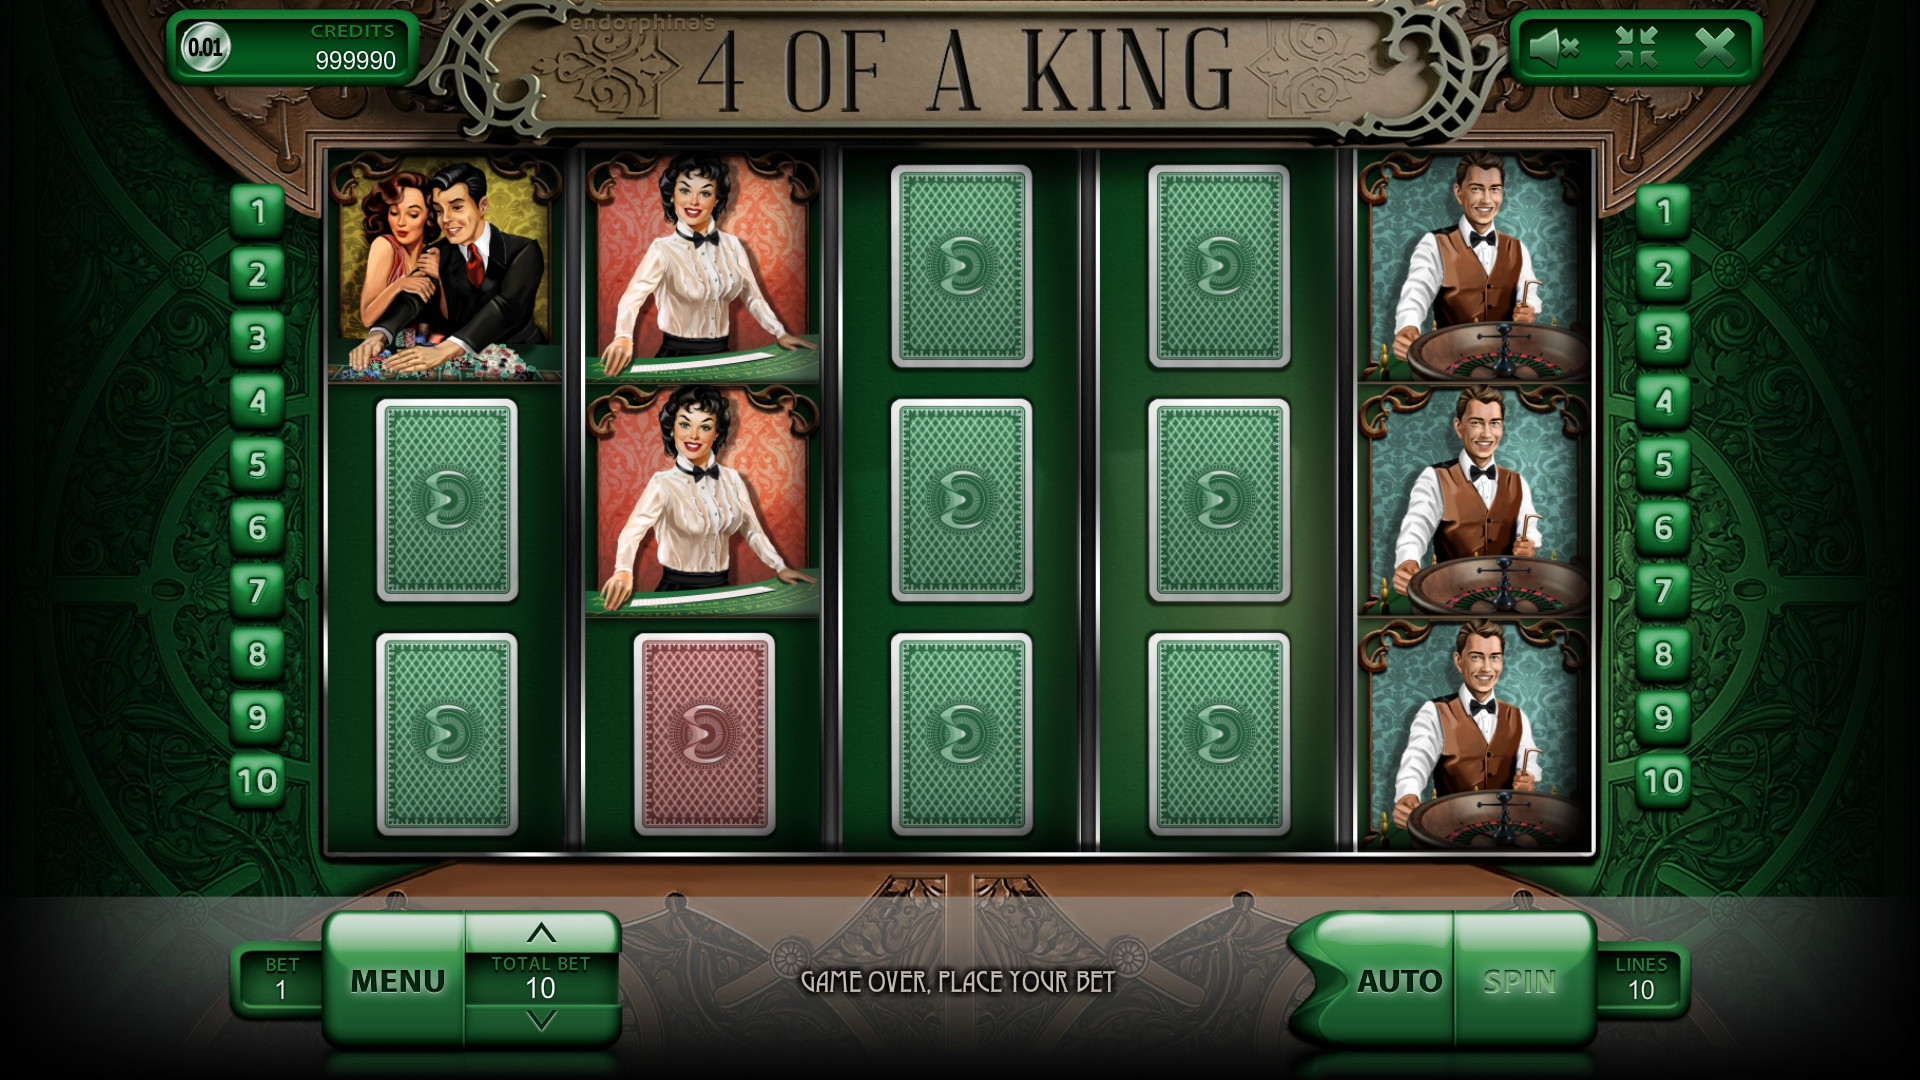 4 of a King (4 of a King) from category Slots